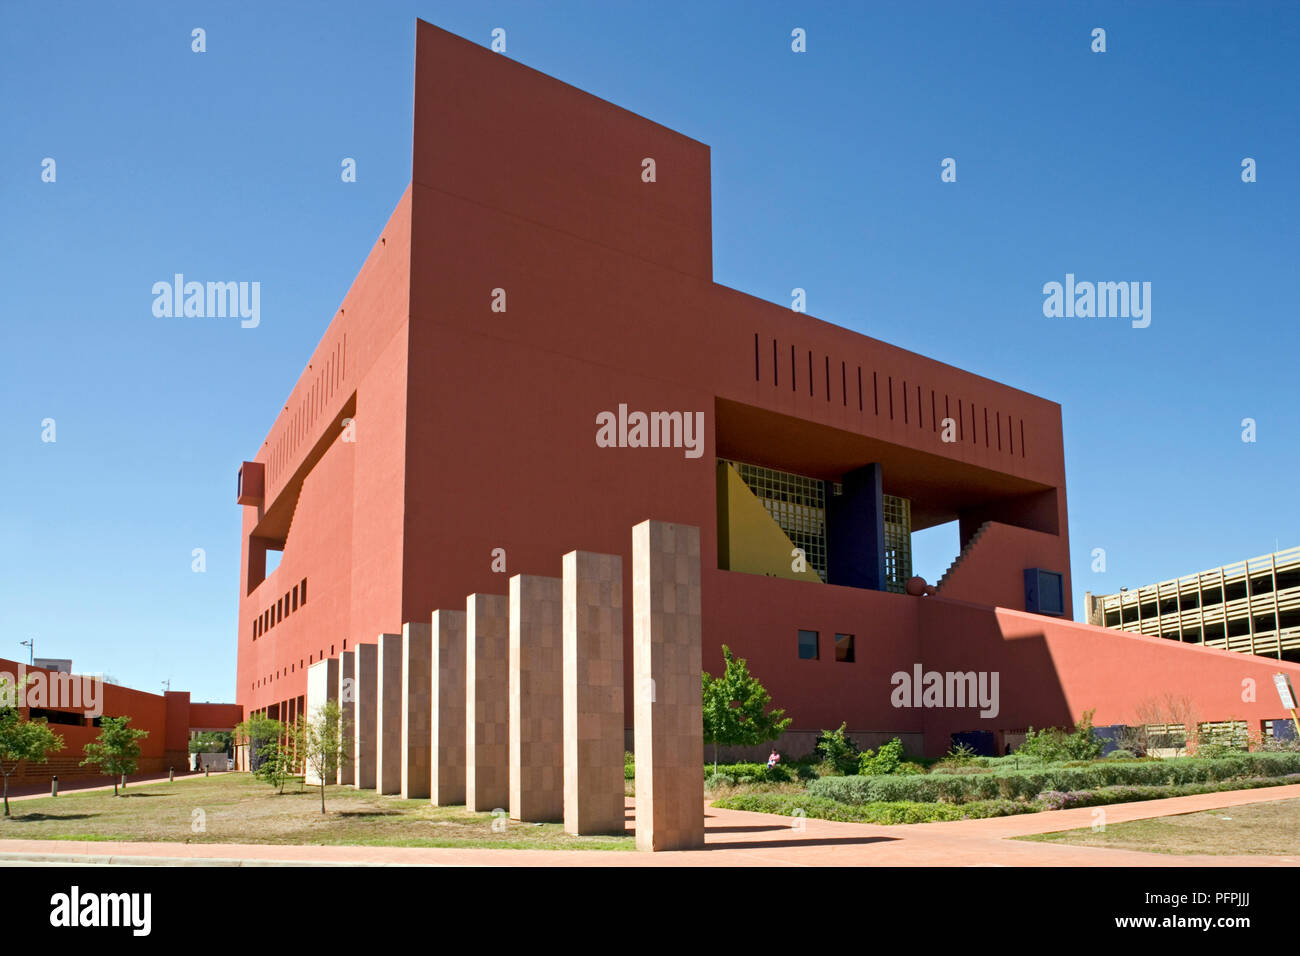 United States of America, Texas, San Antonio, Central Library, exterior of modern red building Stock Photo